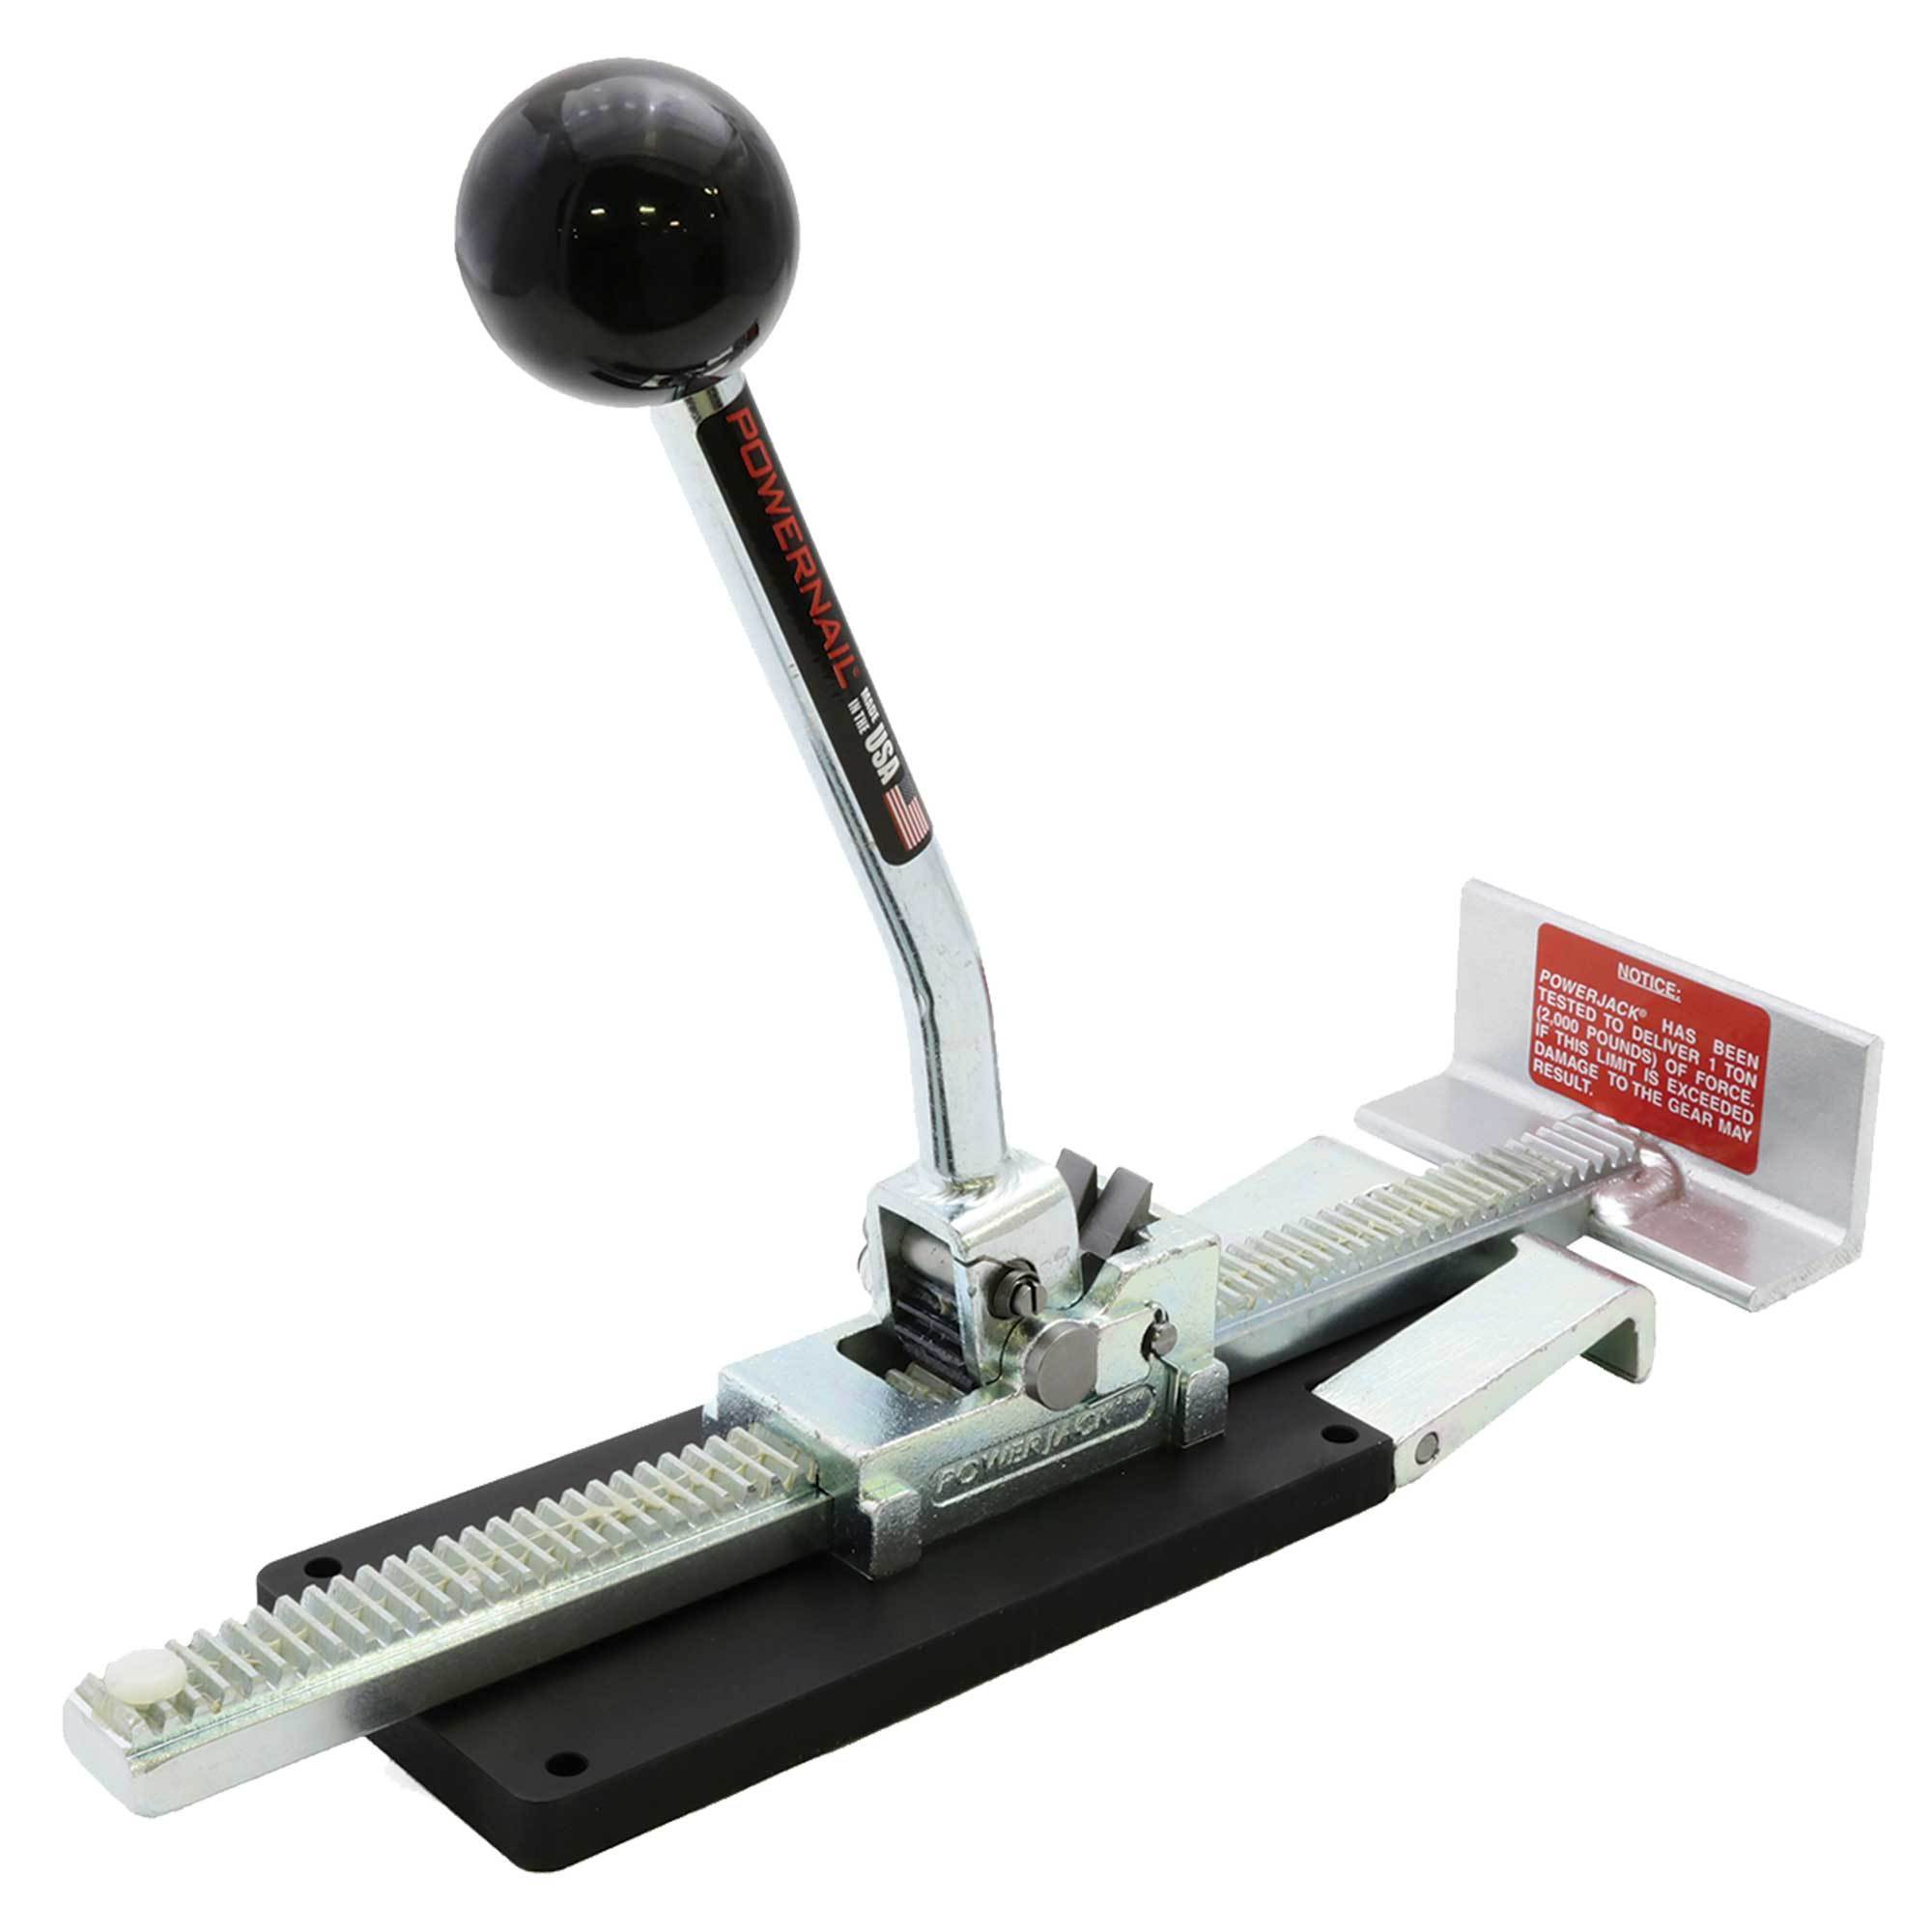 POWERNAIL, Floor Positioning Tool push or pull, Fastener Size 0 in, Nail Gun Angle 0 Â°, Model PJ500.PWR